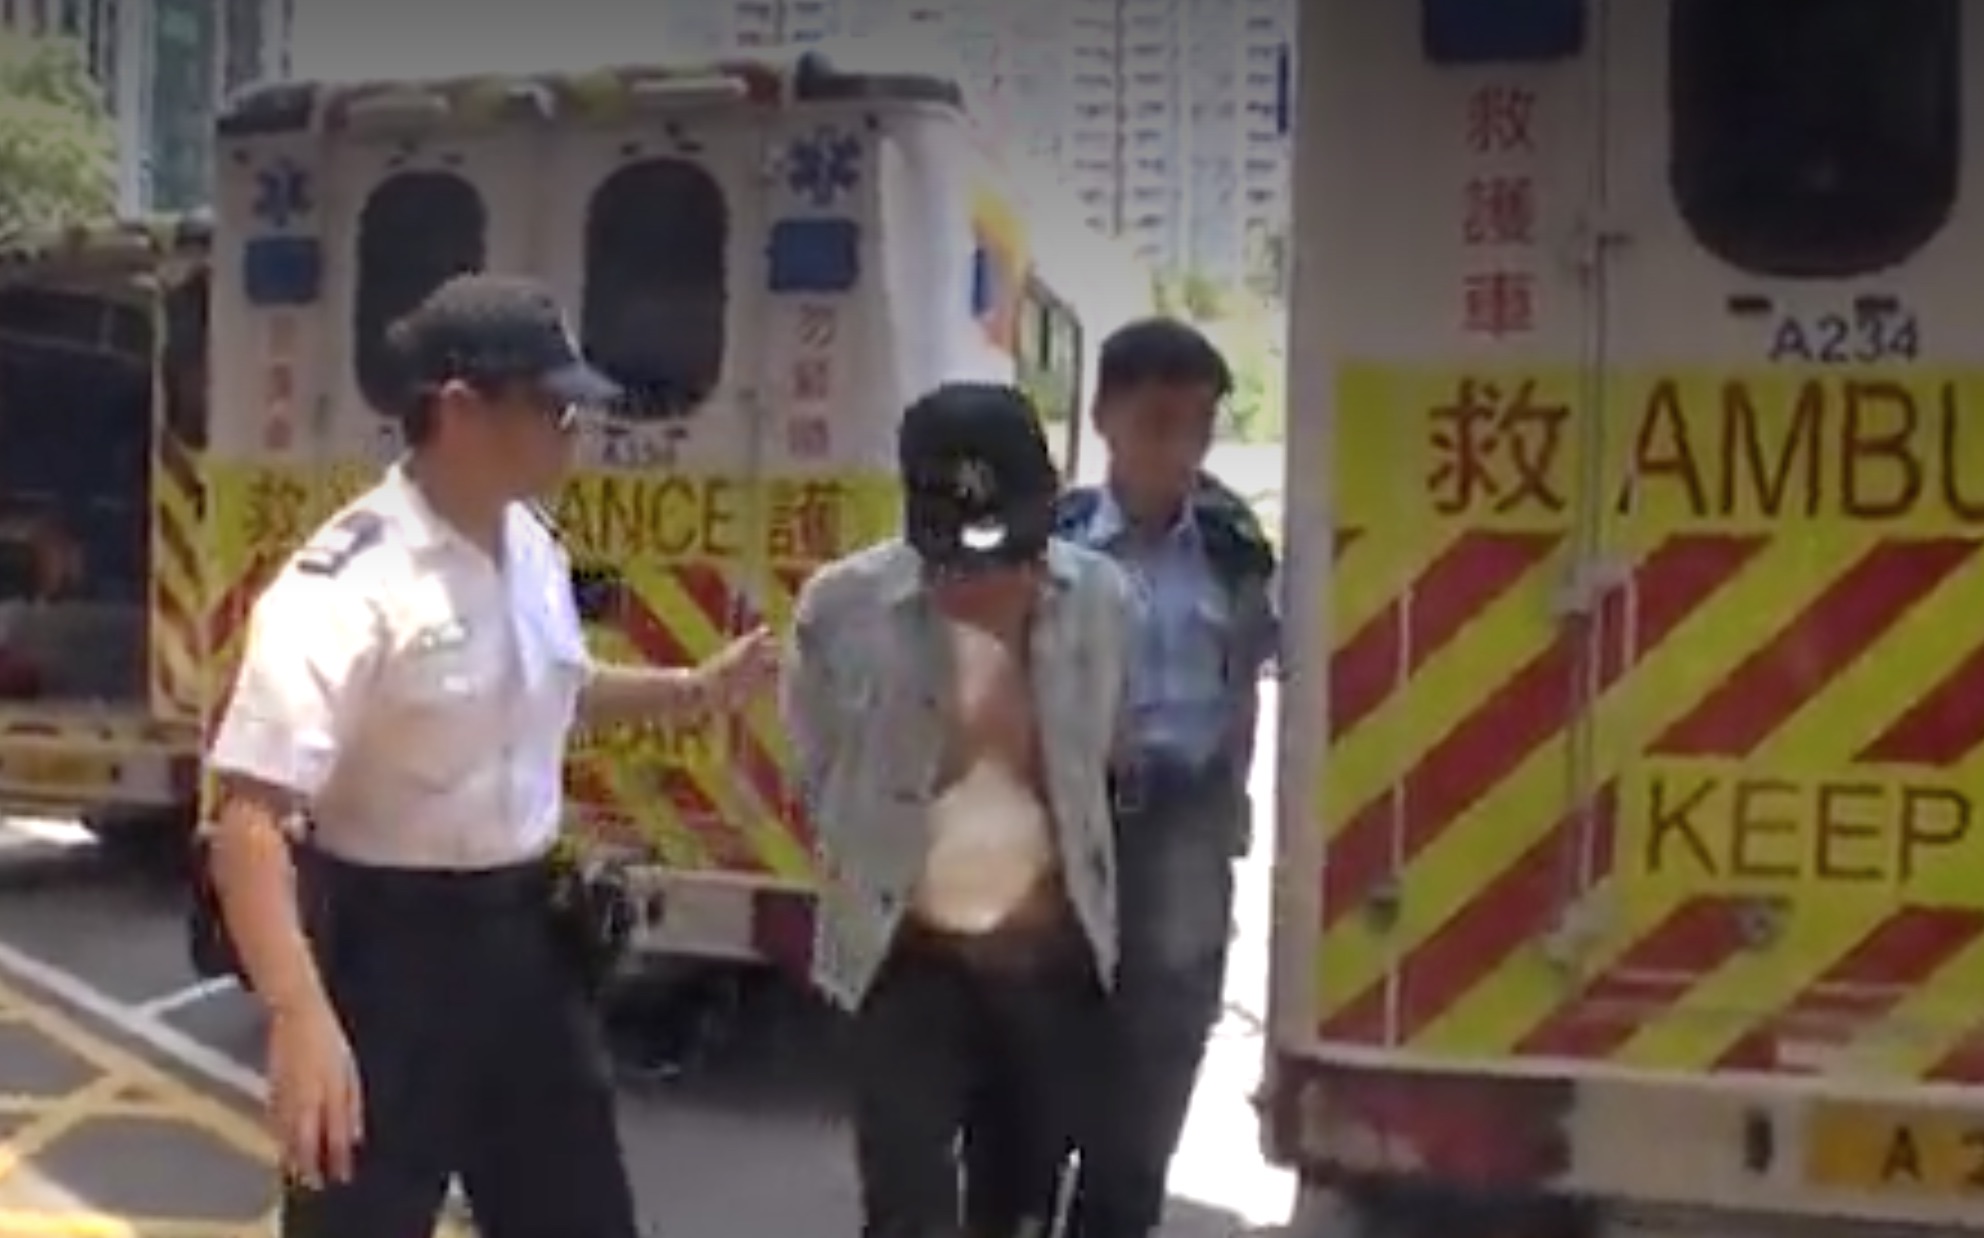 The suspect being led away by authorities. Picture: Apple Daily screen grab